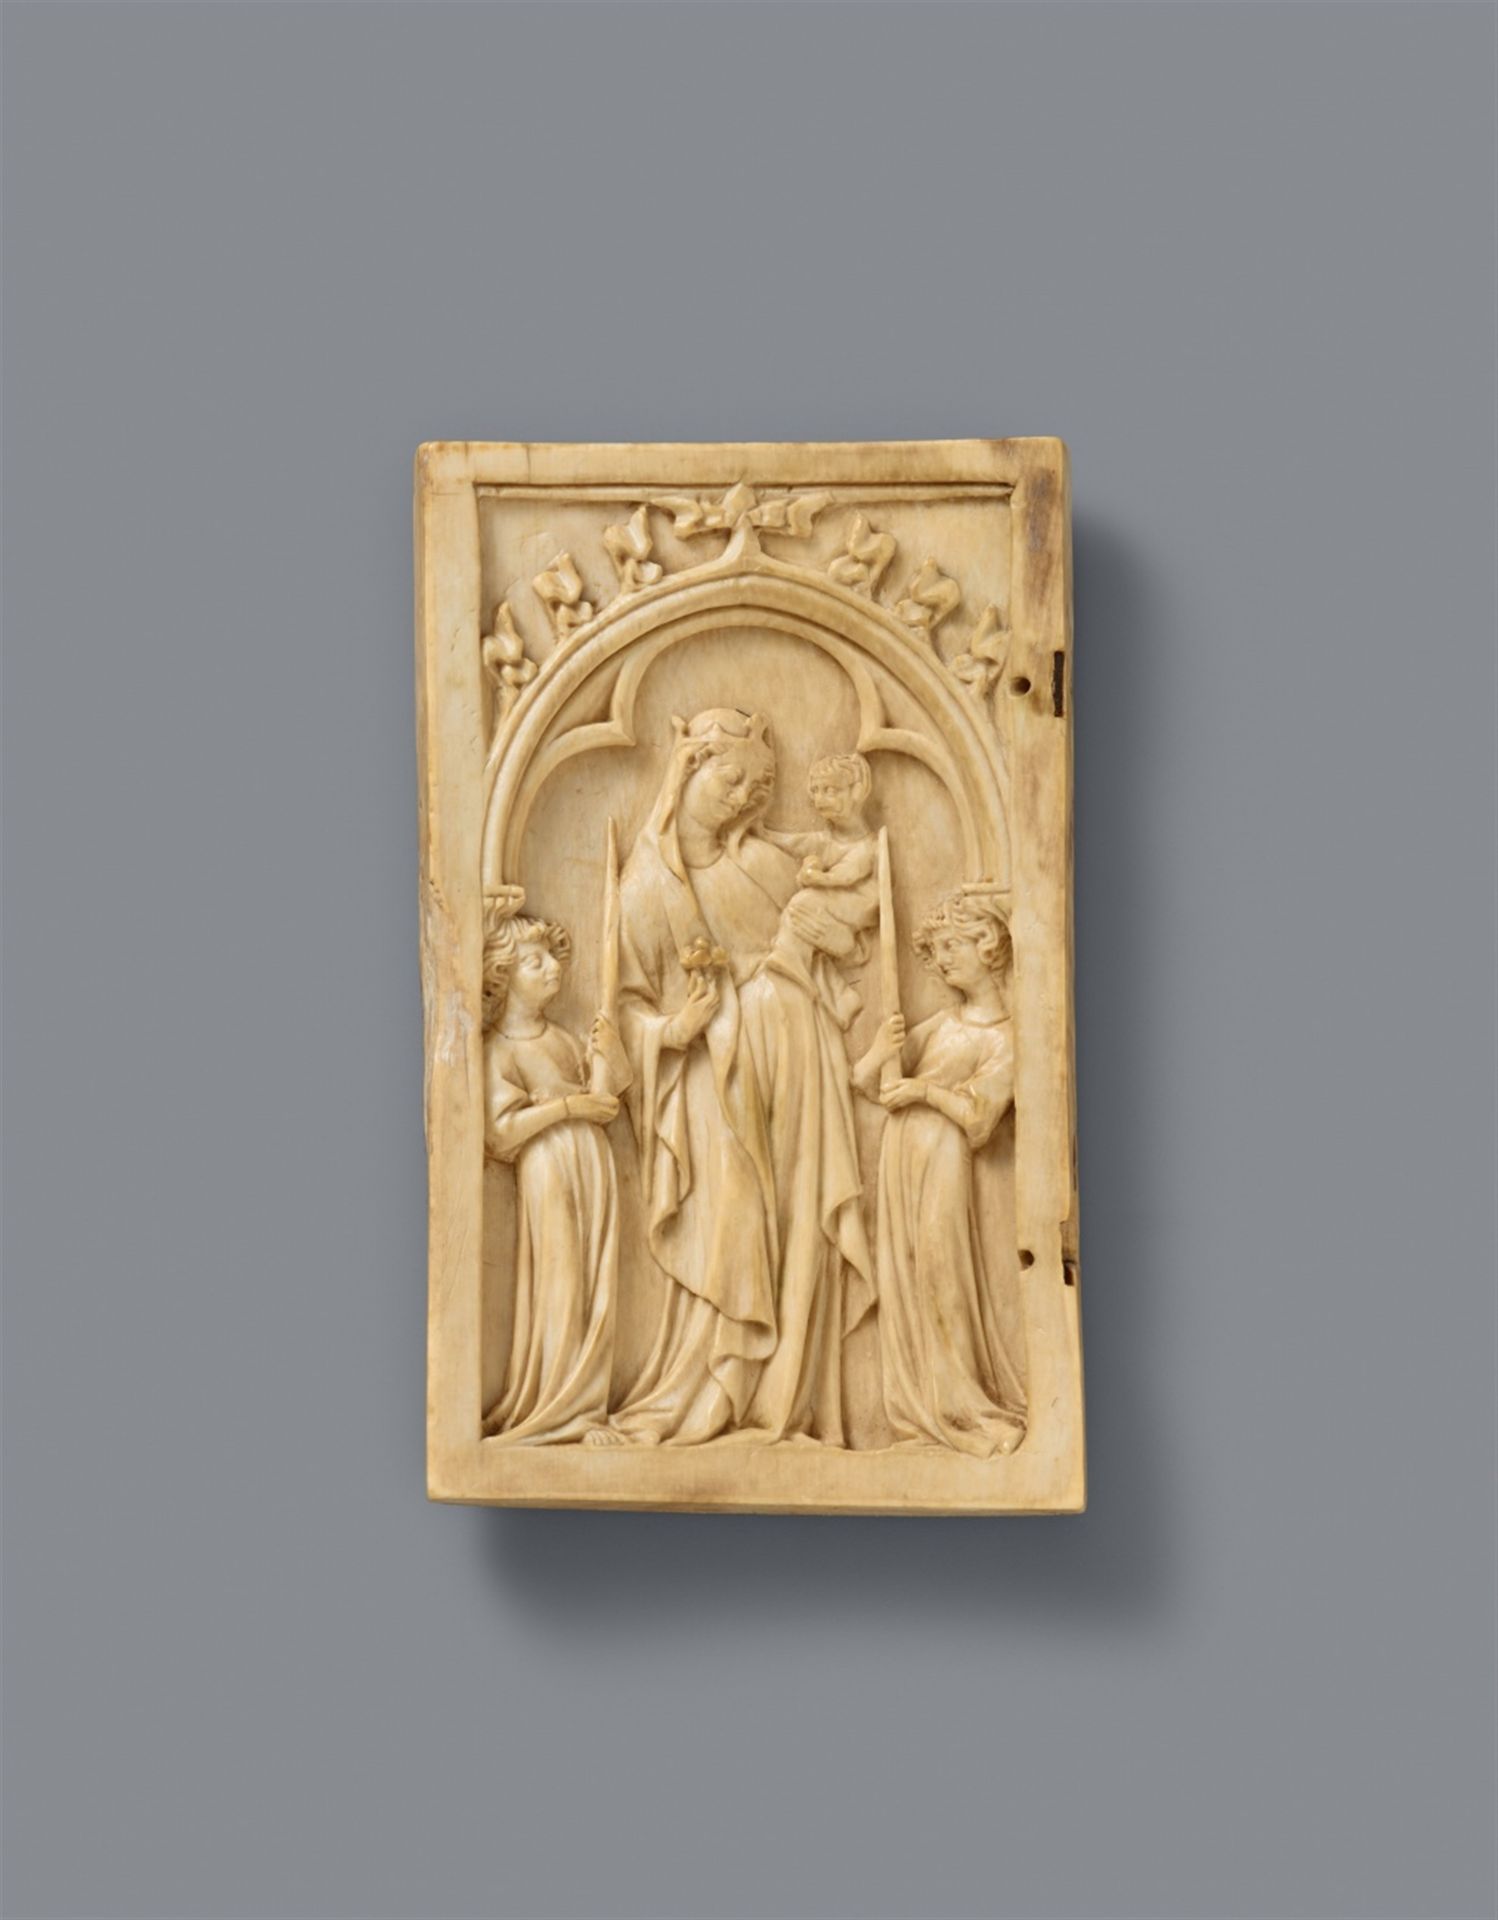 A French carved ivory relief of the Virgin and Child, first quarter 14th century